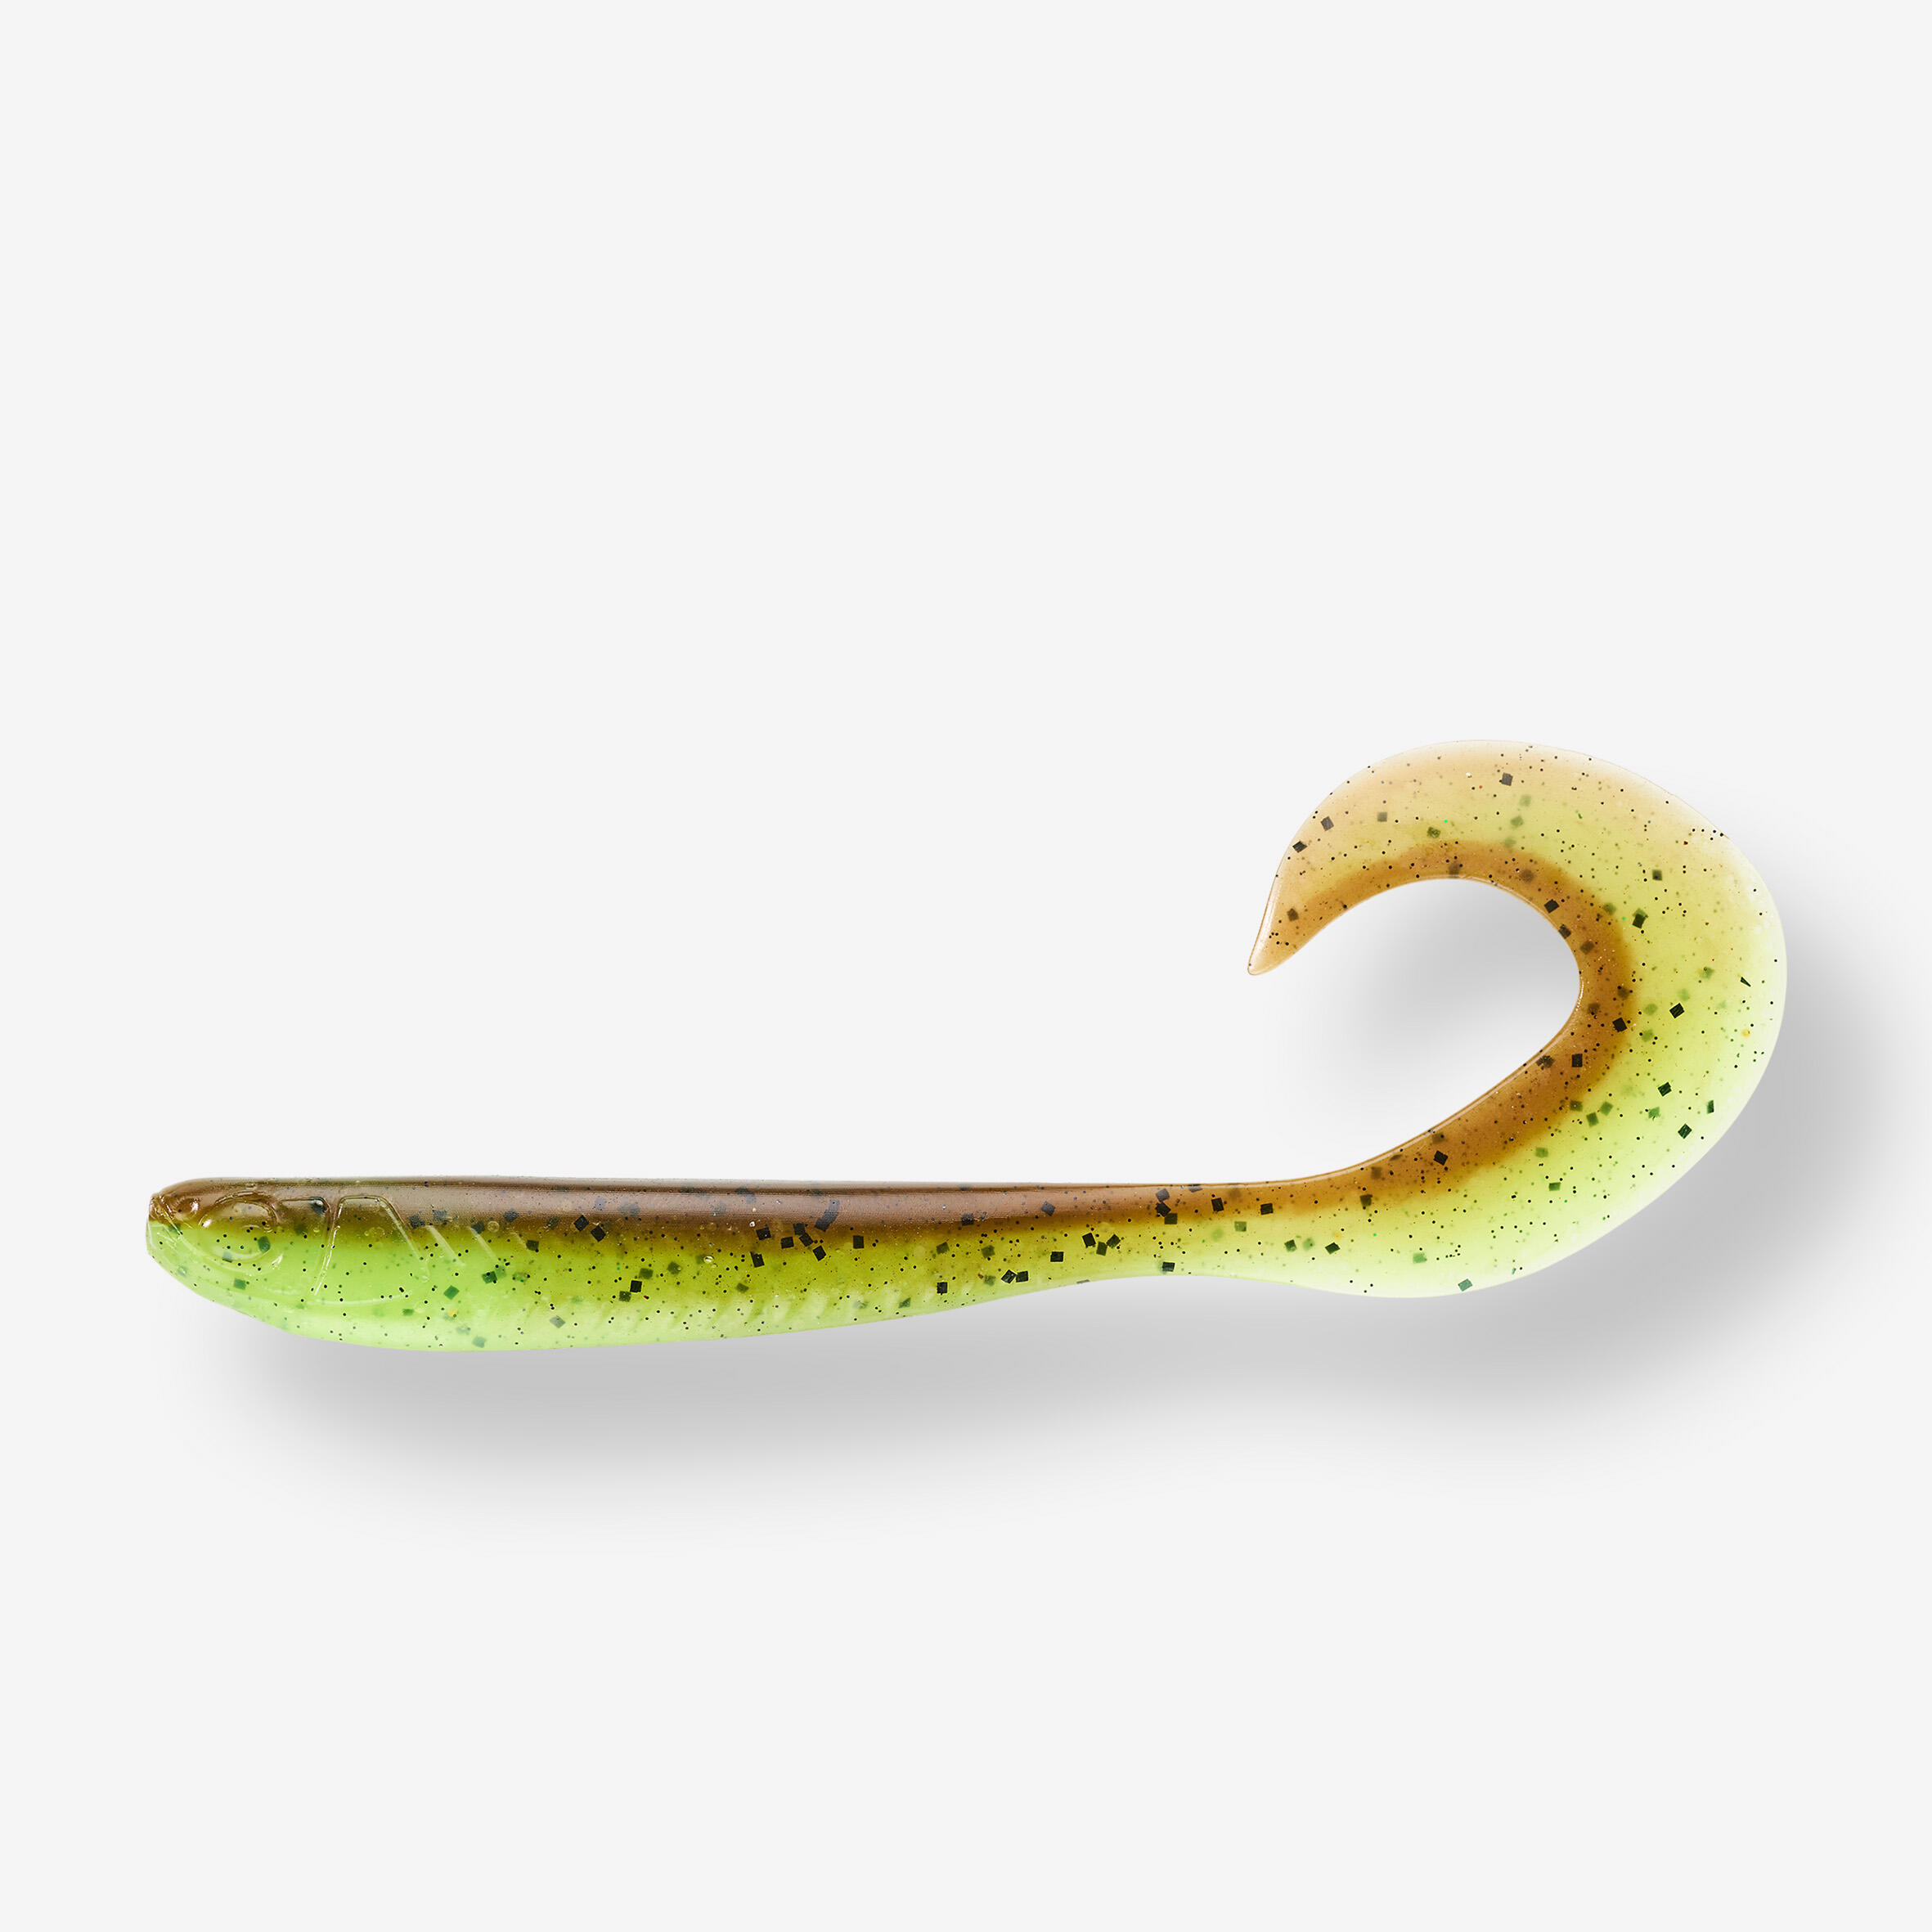 CAPERLAN GRUB SHAPED SOFT LURE WITH ATTRACTANT WXM YUBARI GRB 130 GREEN BROWN